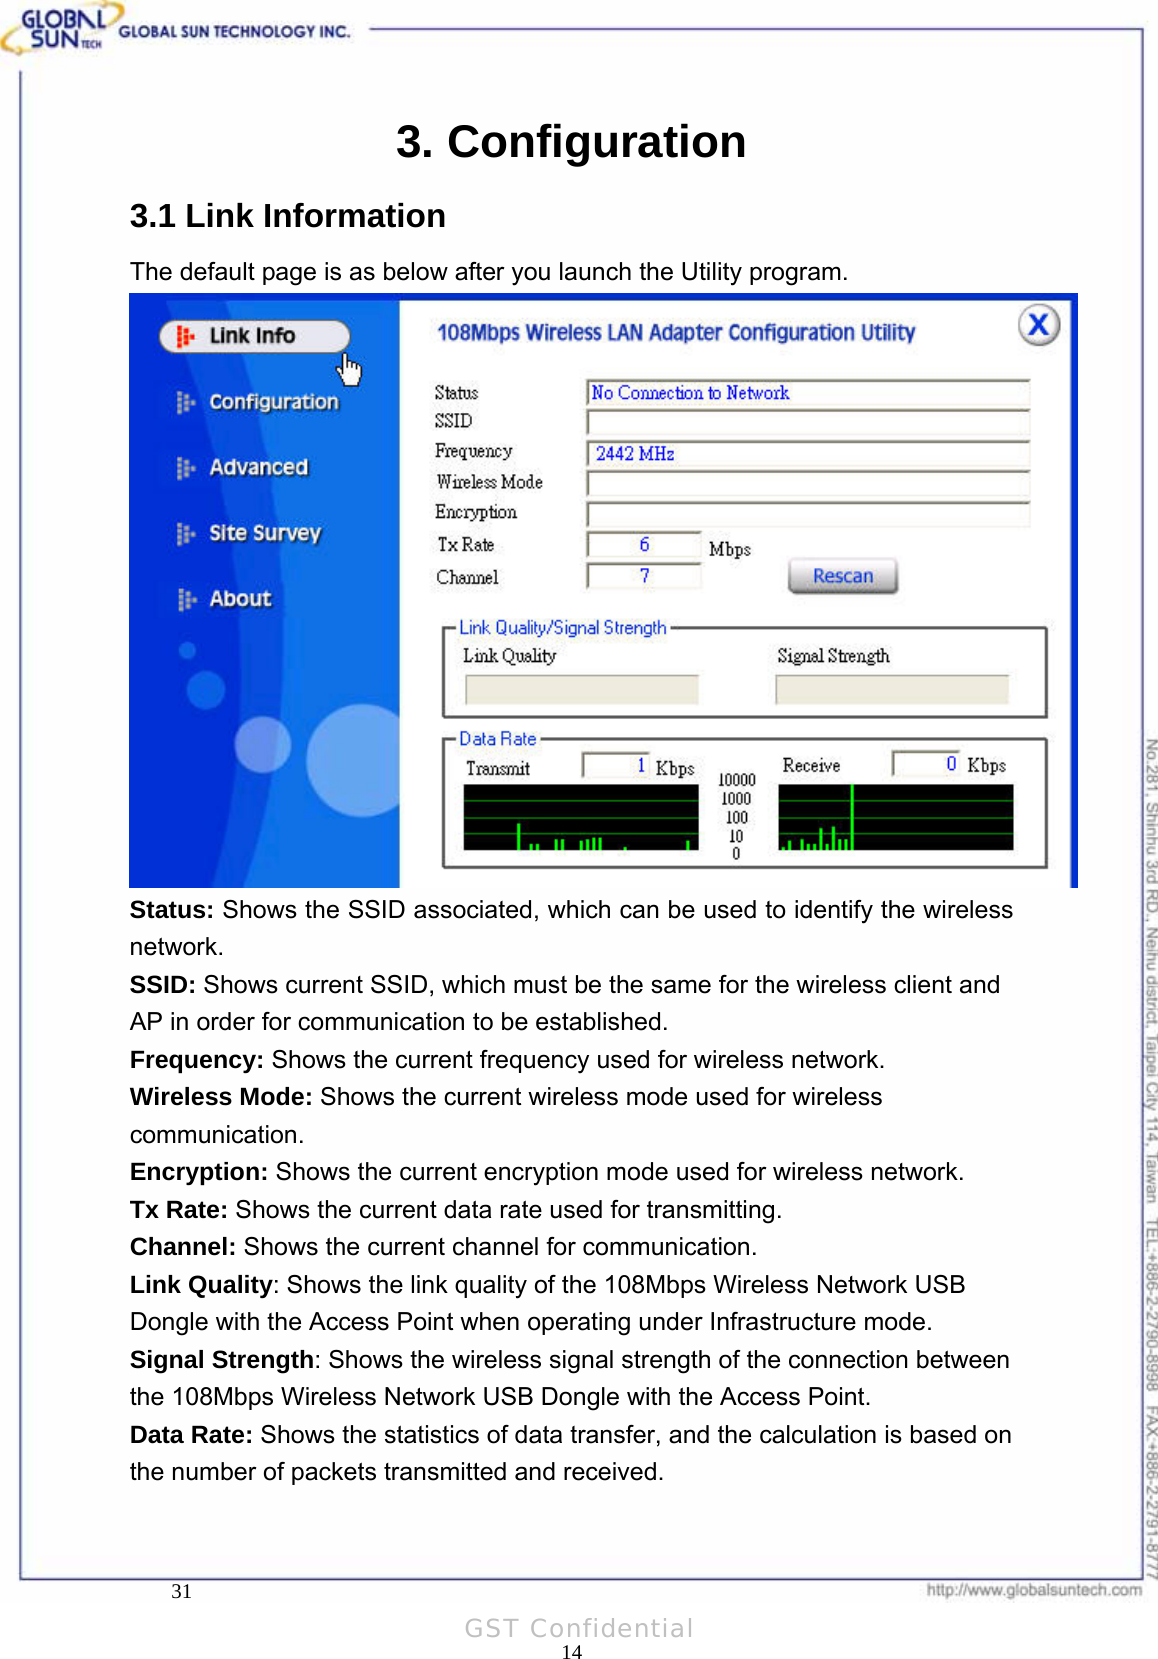  Product: 802.11a/g Wireless USB Dongle Model: WL UD 2554 17A3. Configuration 3.1 Link Information The default page is as below after you launch the Utility program.  Status: Shows the SSID associated, which can be used to identify the wireless network. SSID: Shows current SSID, which must be the same for the wireless client and AP in order for communication to be established. Frequency: Shows the current frequency used for wireless network. Wireless Mode: Shows the current wireless mode used for wireless communication. Encryption: Shows the current encryption mode used for wireless network. Tx Rate: Shows the current data rate used for transmitting. Channel: Shows the current channel for communication. Link Quality: Shows the link quality of the 108Mbps Wireless Network USB Dongle with the Access Point when operating under Infrastructure mode. Signal Strength: Shows the wireless signal strength of the connection between the 108Mbps Wireless Network USB Dongle with the Access Point. Data Rate: Shows the statistics of data transfer, and the calculation is based on the number of packets transmitted and received.     31 14GST Confidential 